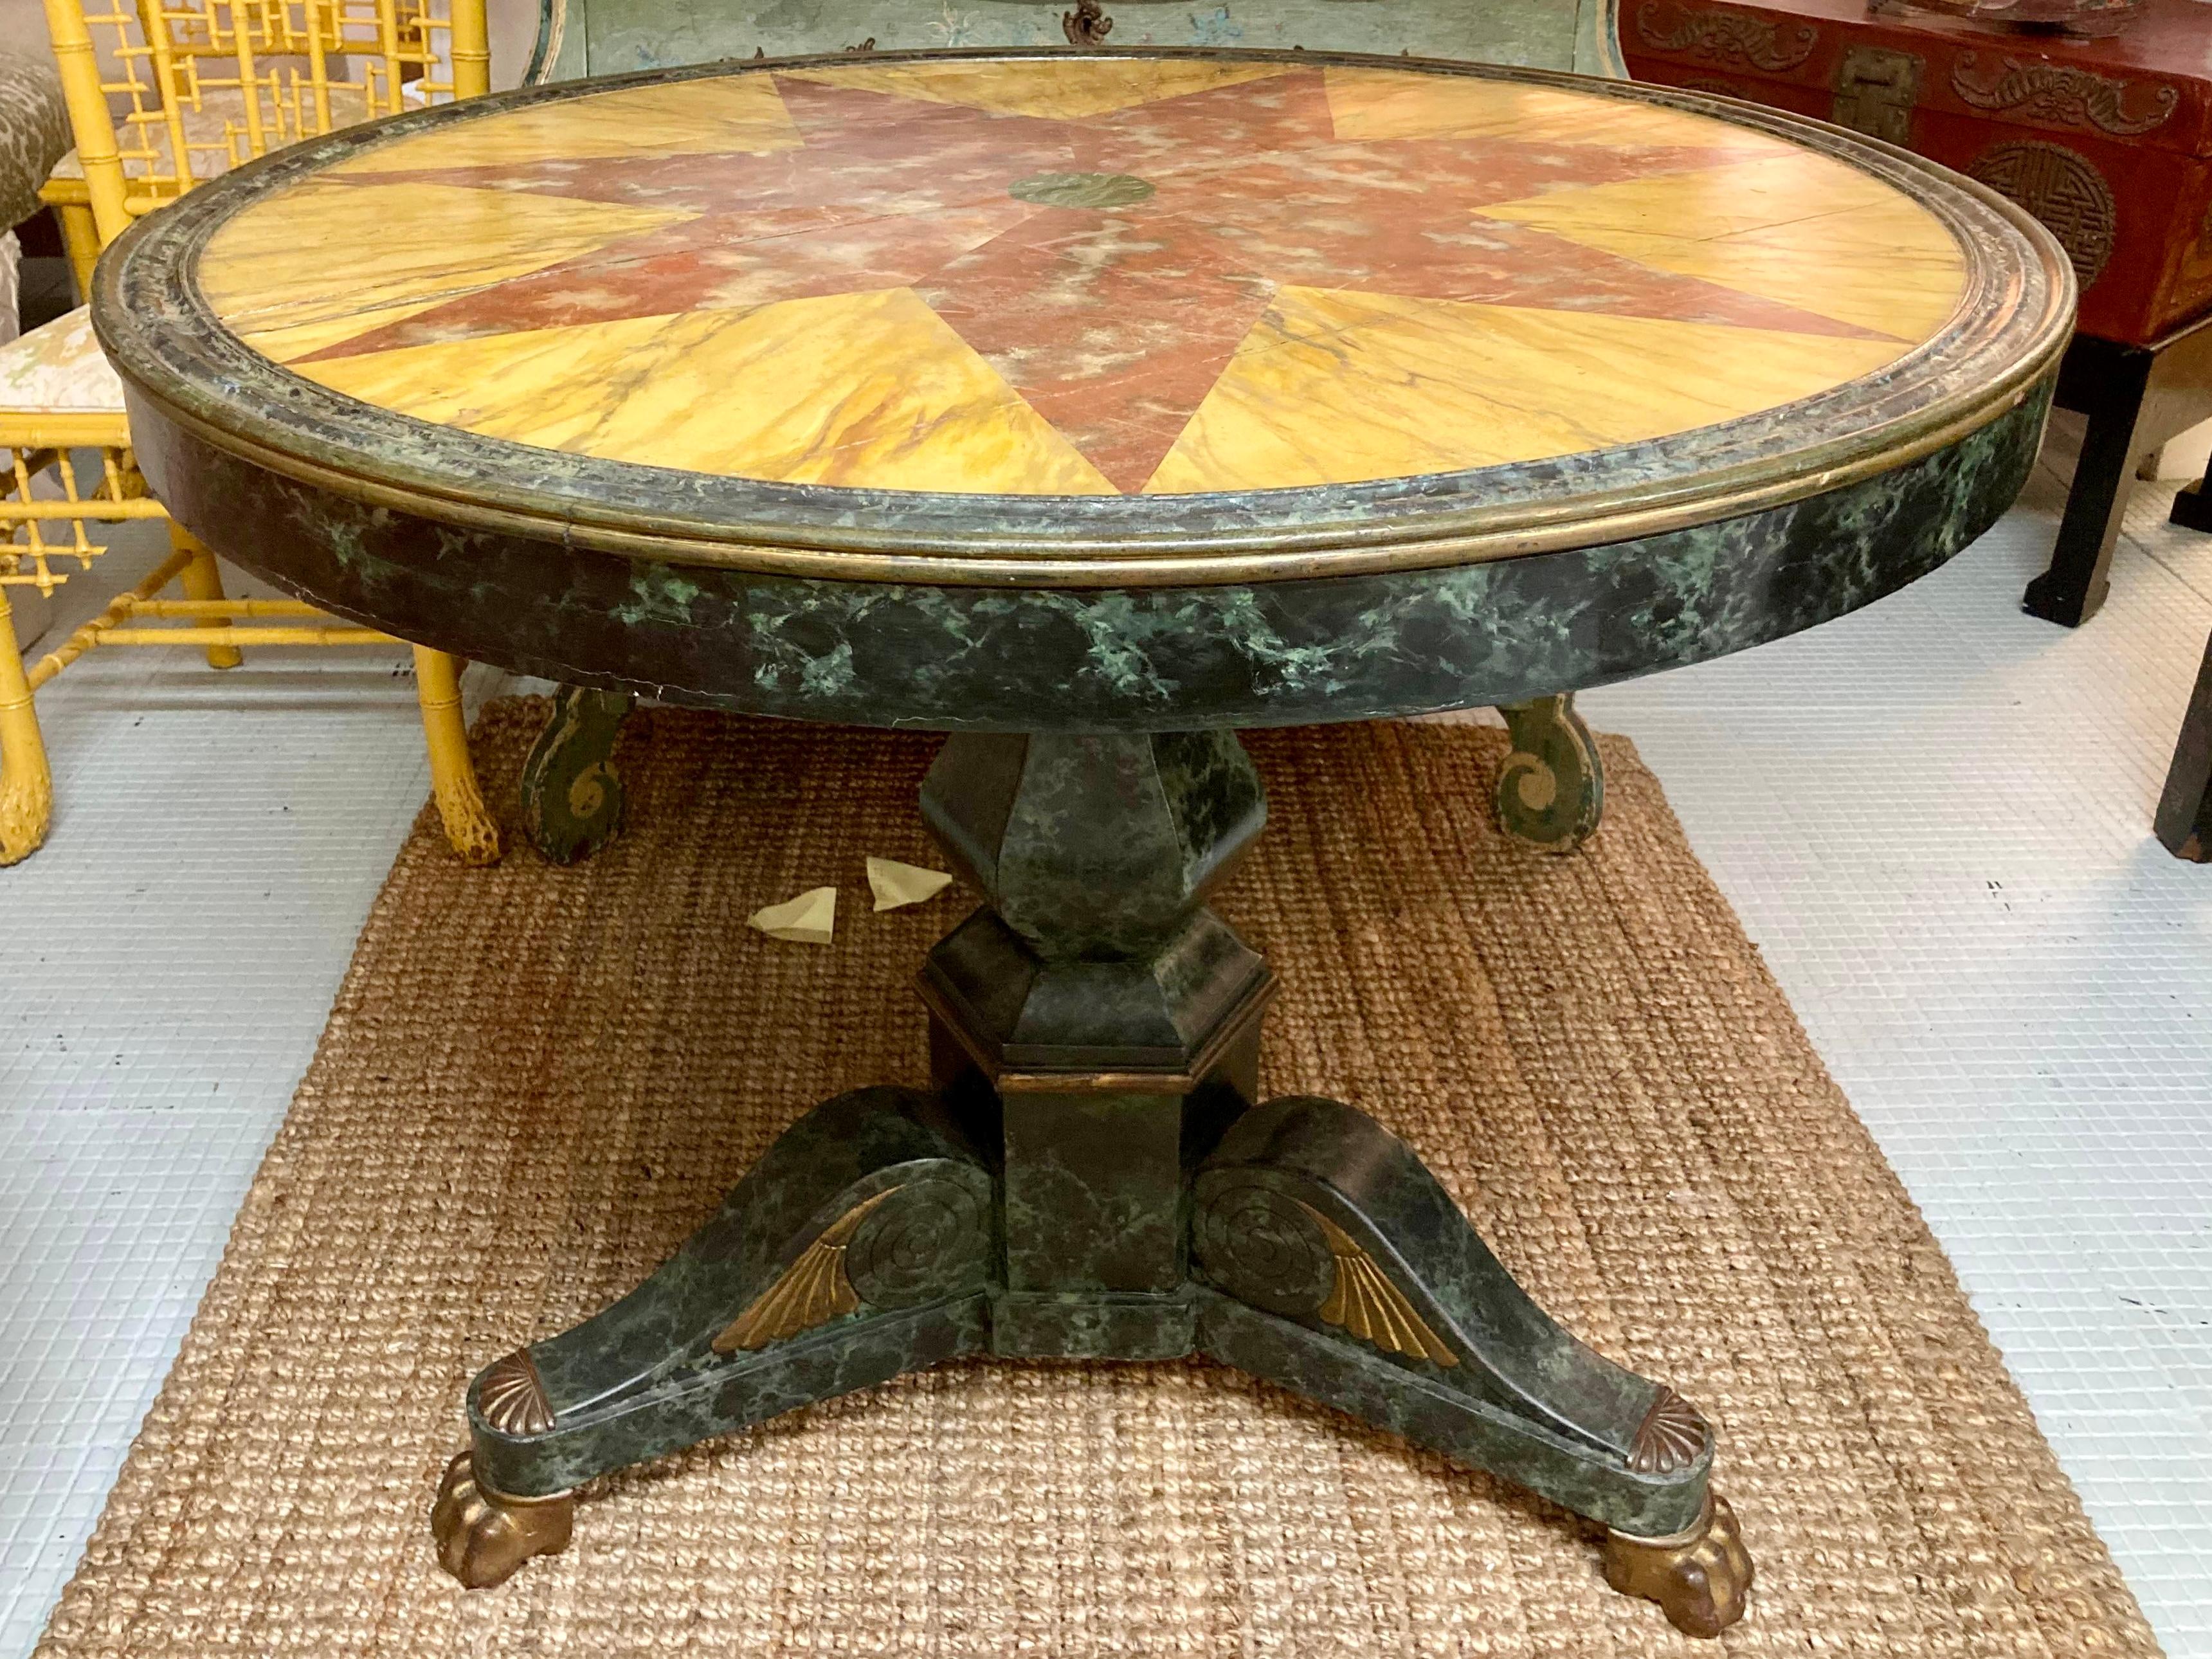 Italian Faux Painted Pietra Dura round wood pedestal dining table. This table can be used as a dining table or a center table. Looks like marble but is all painted wood. Add some 19th Century Italian style to your home.